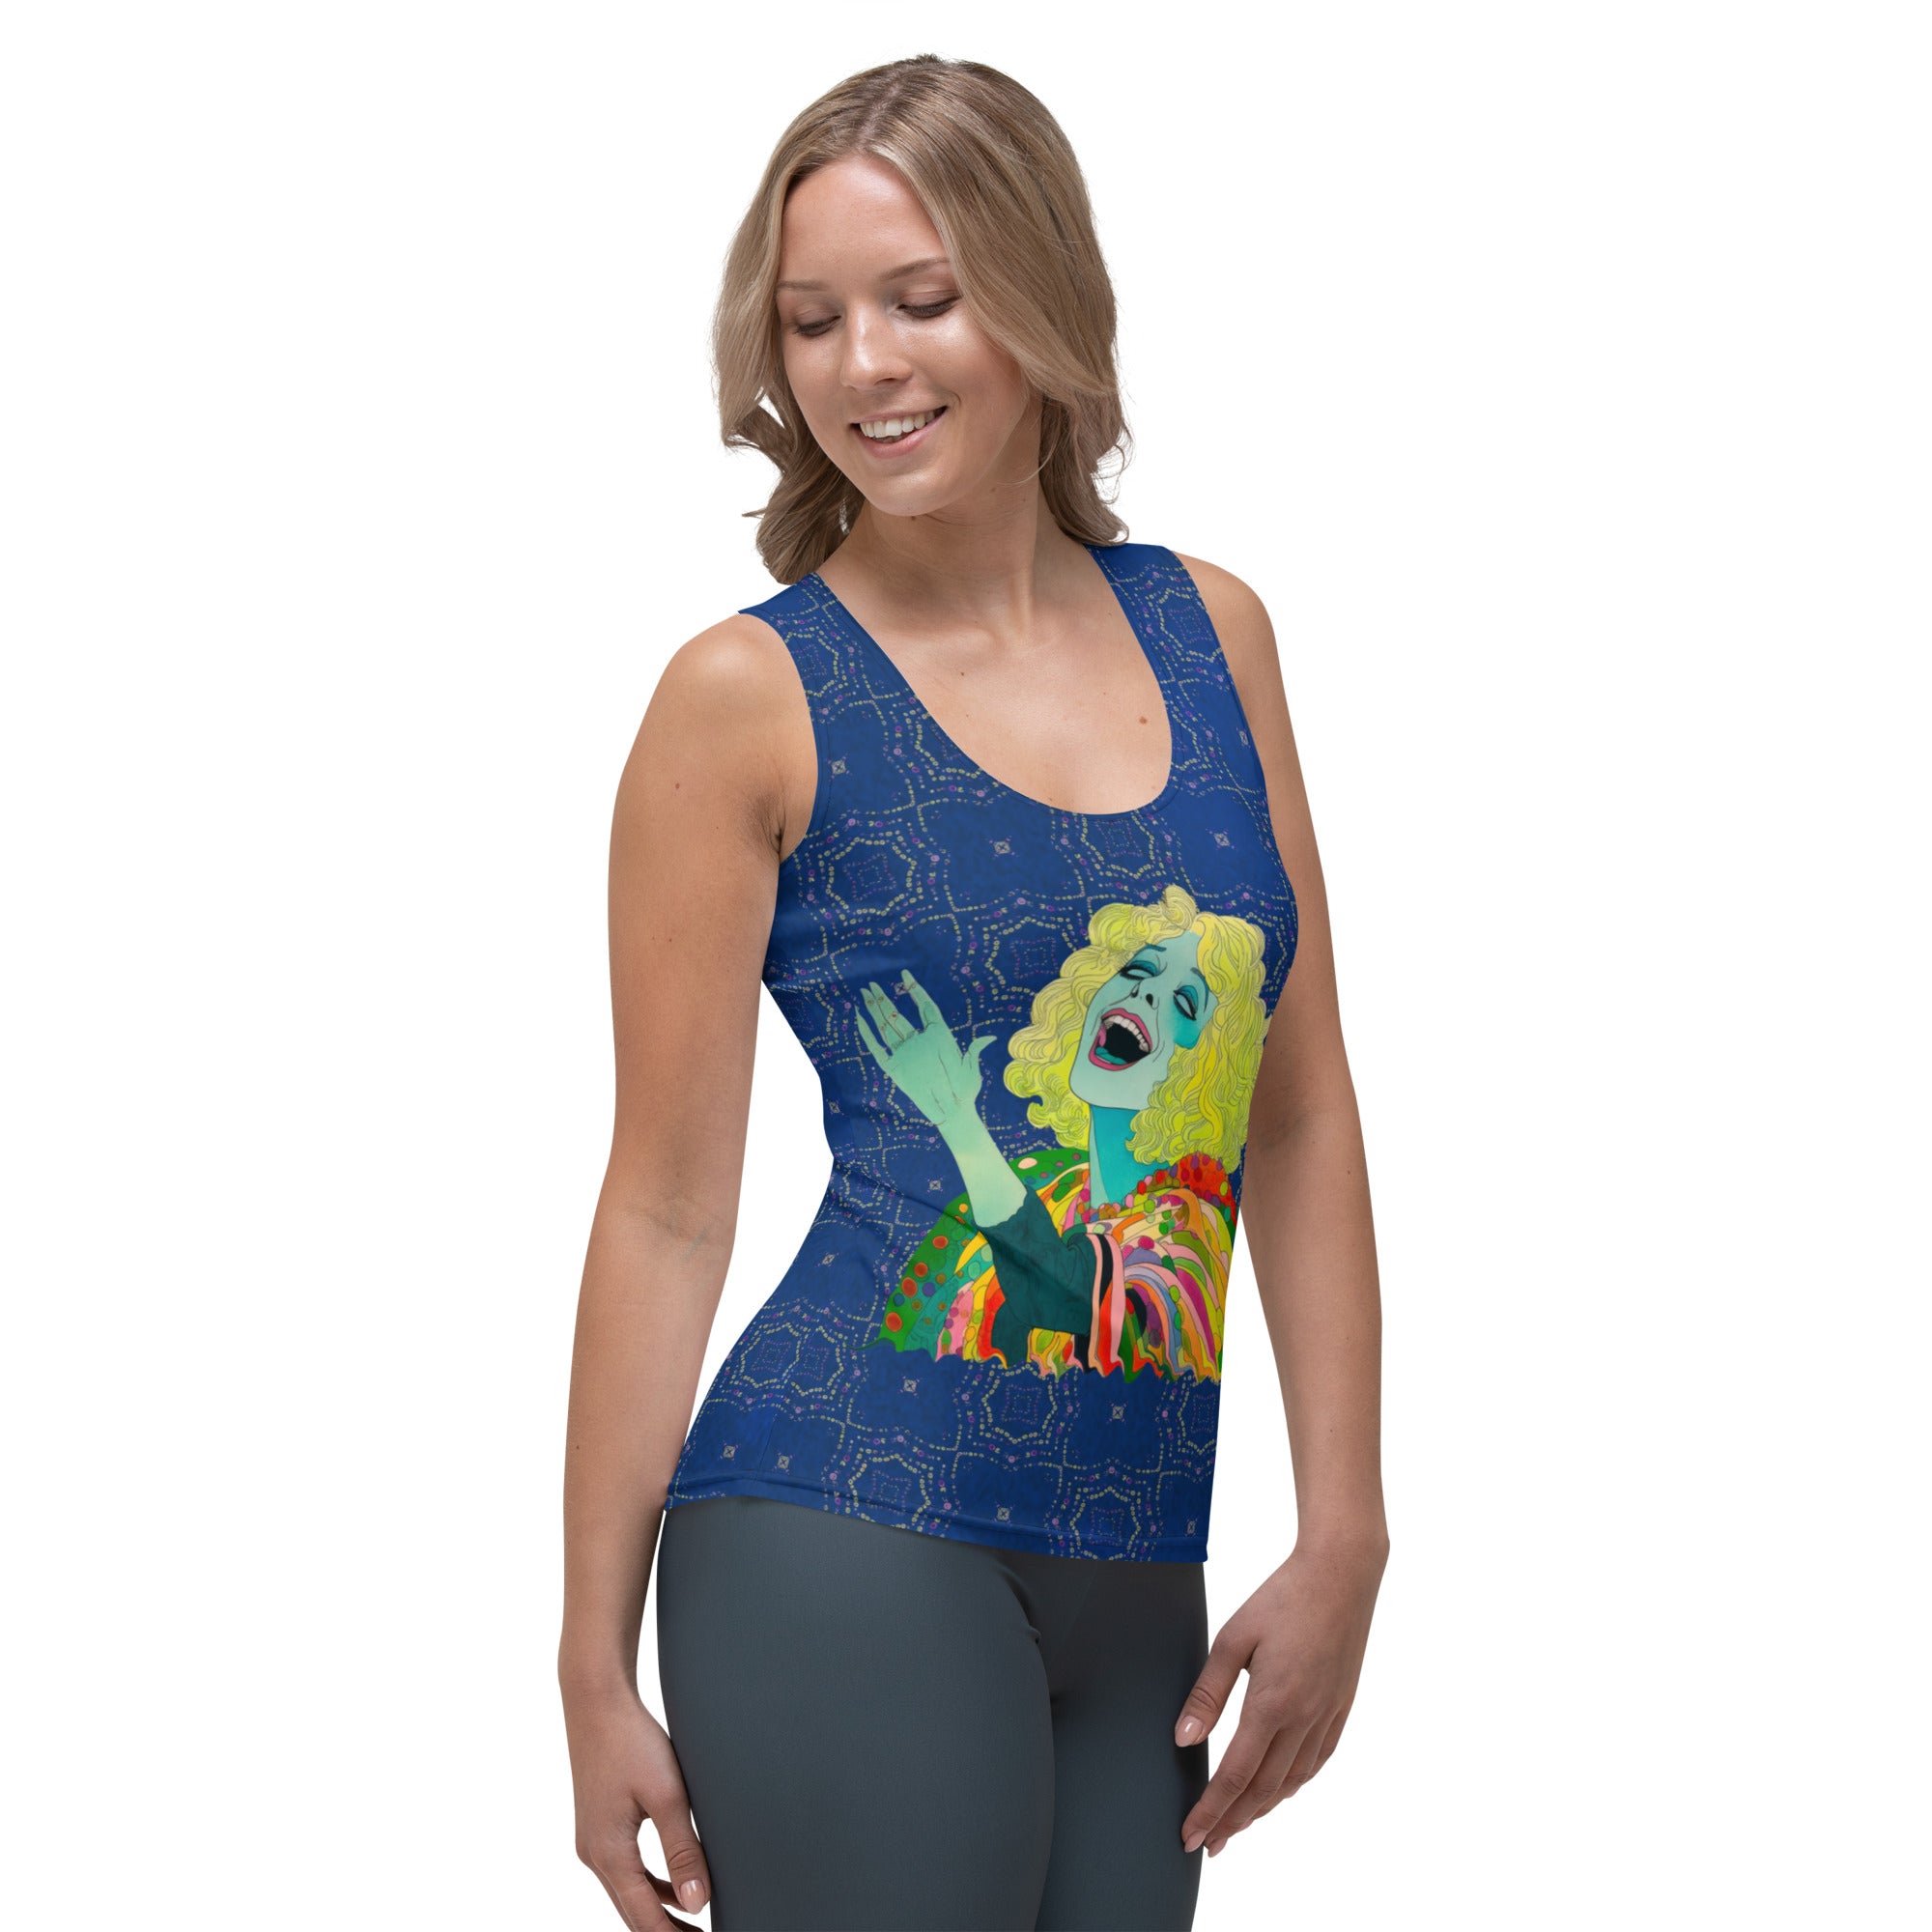 Florals Fusion Women's Tank Top on a clothing mannequin.